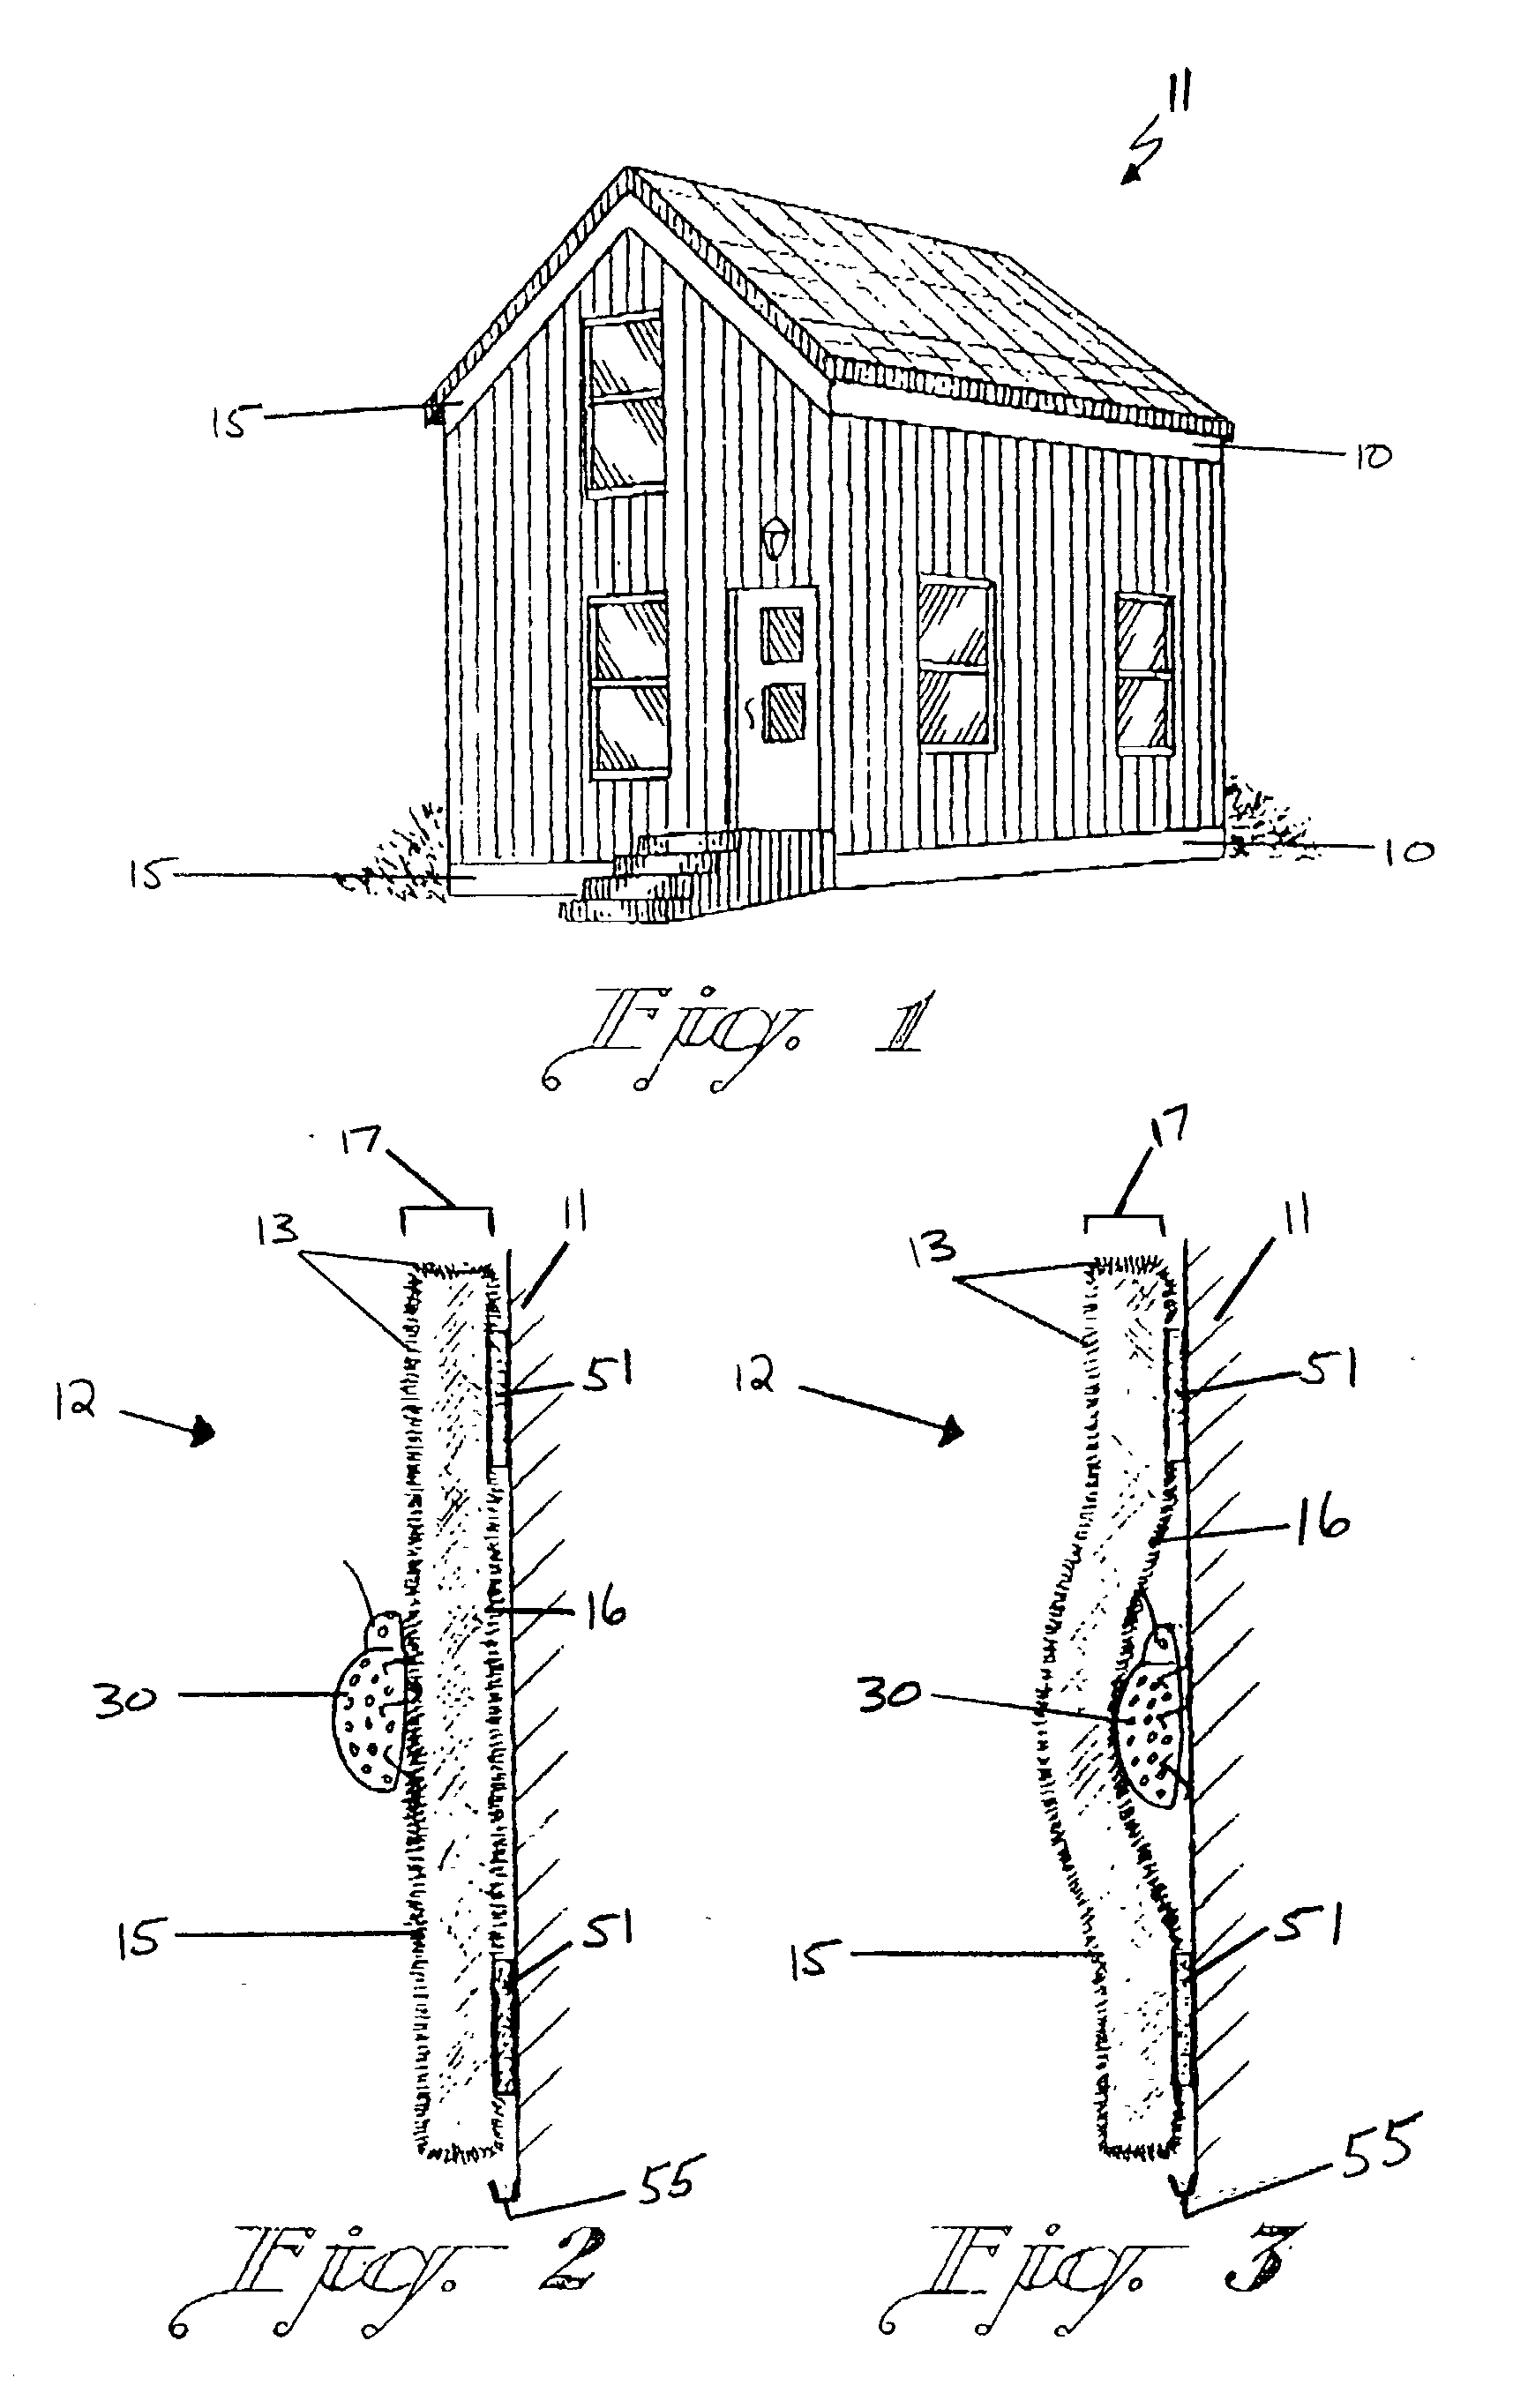 Article for preventing pests from entering a building structure and methods of using/manufacturing the same